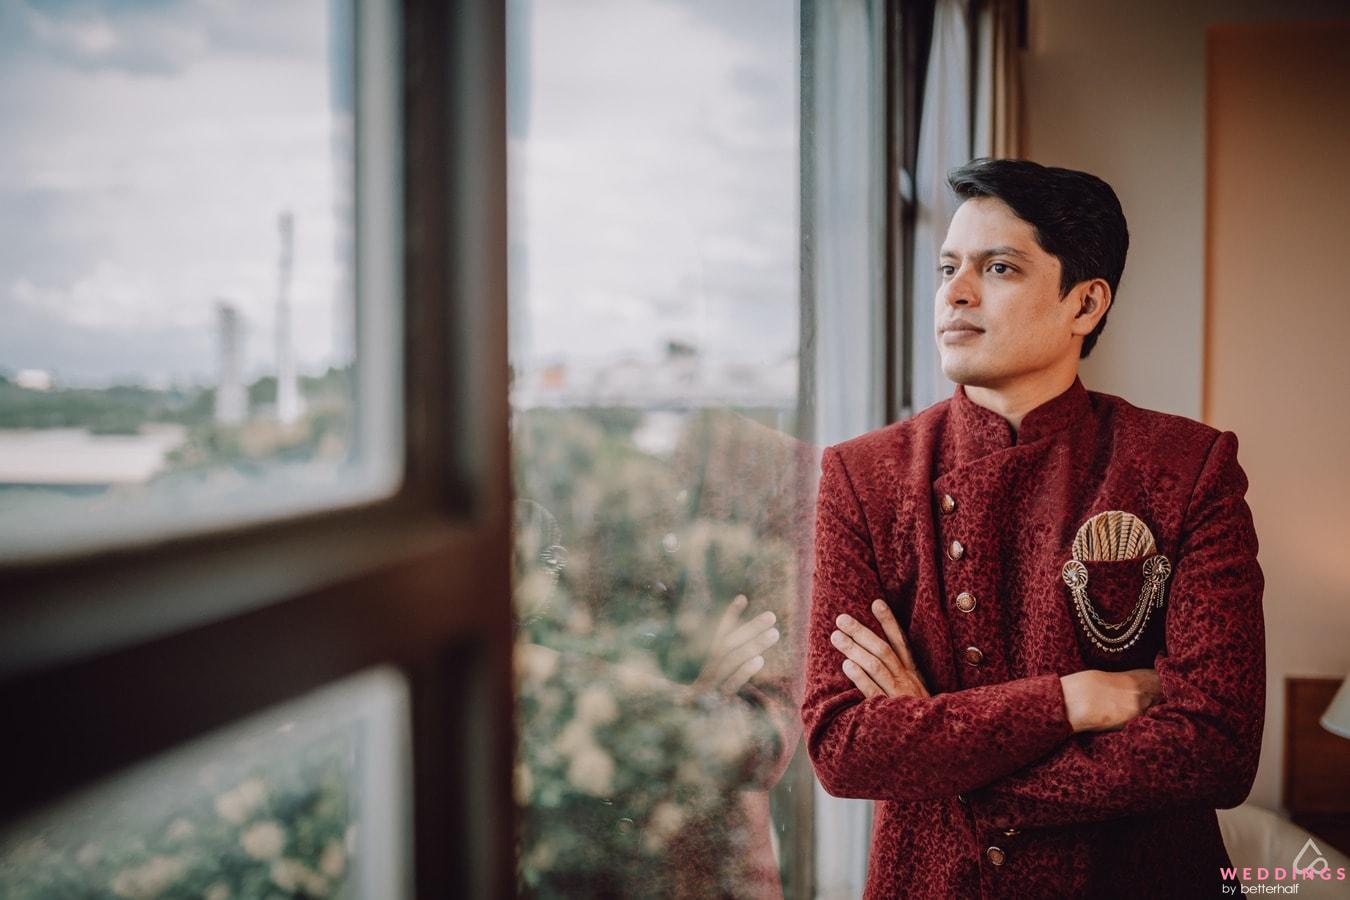 Sherwani Shots of Grooms That Capture Their Outfits Perfectly! |  WeddingBazaar